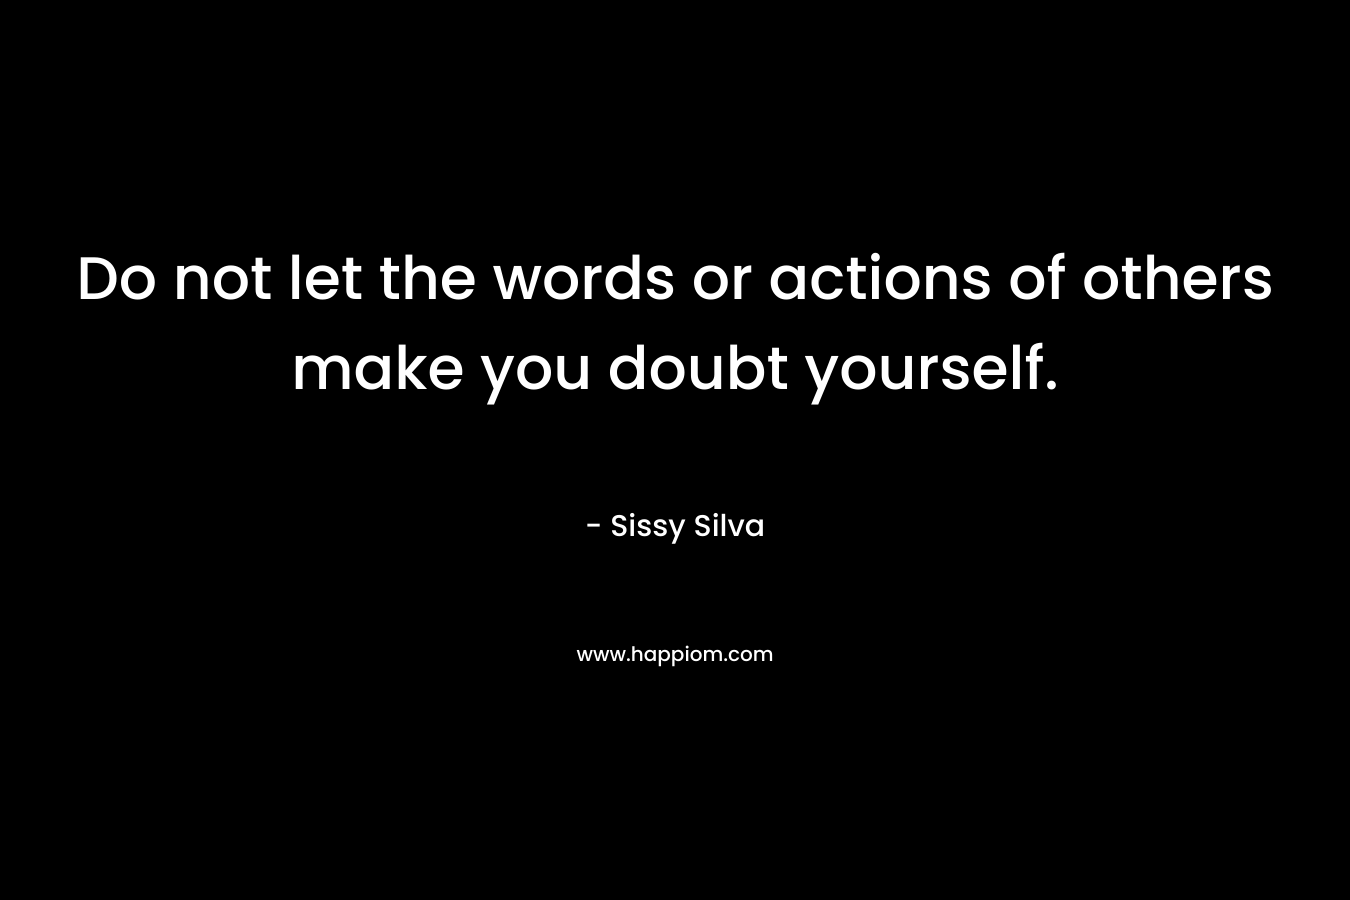 Do not let the words or actions of others make you doubt yourself.